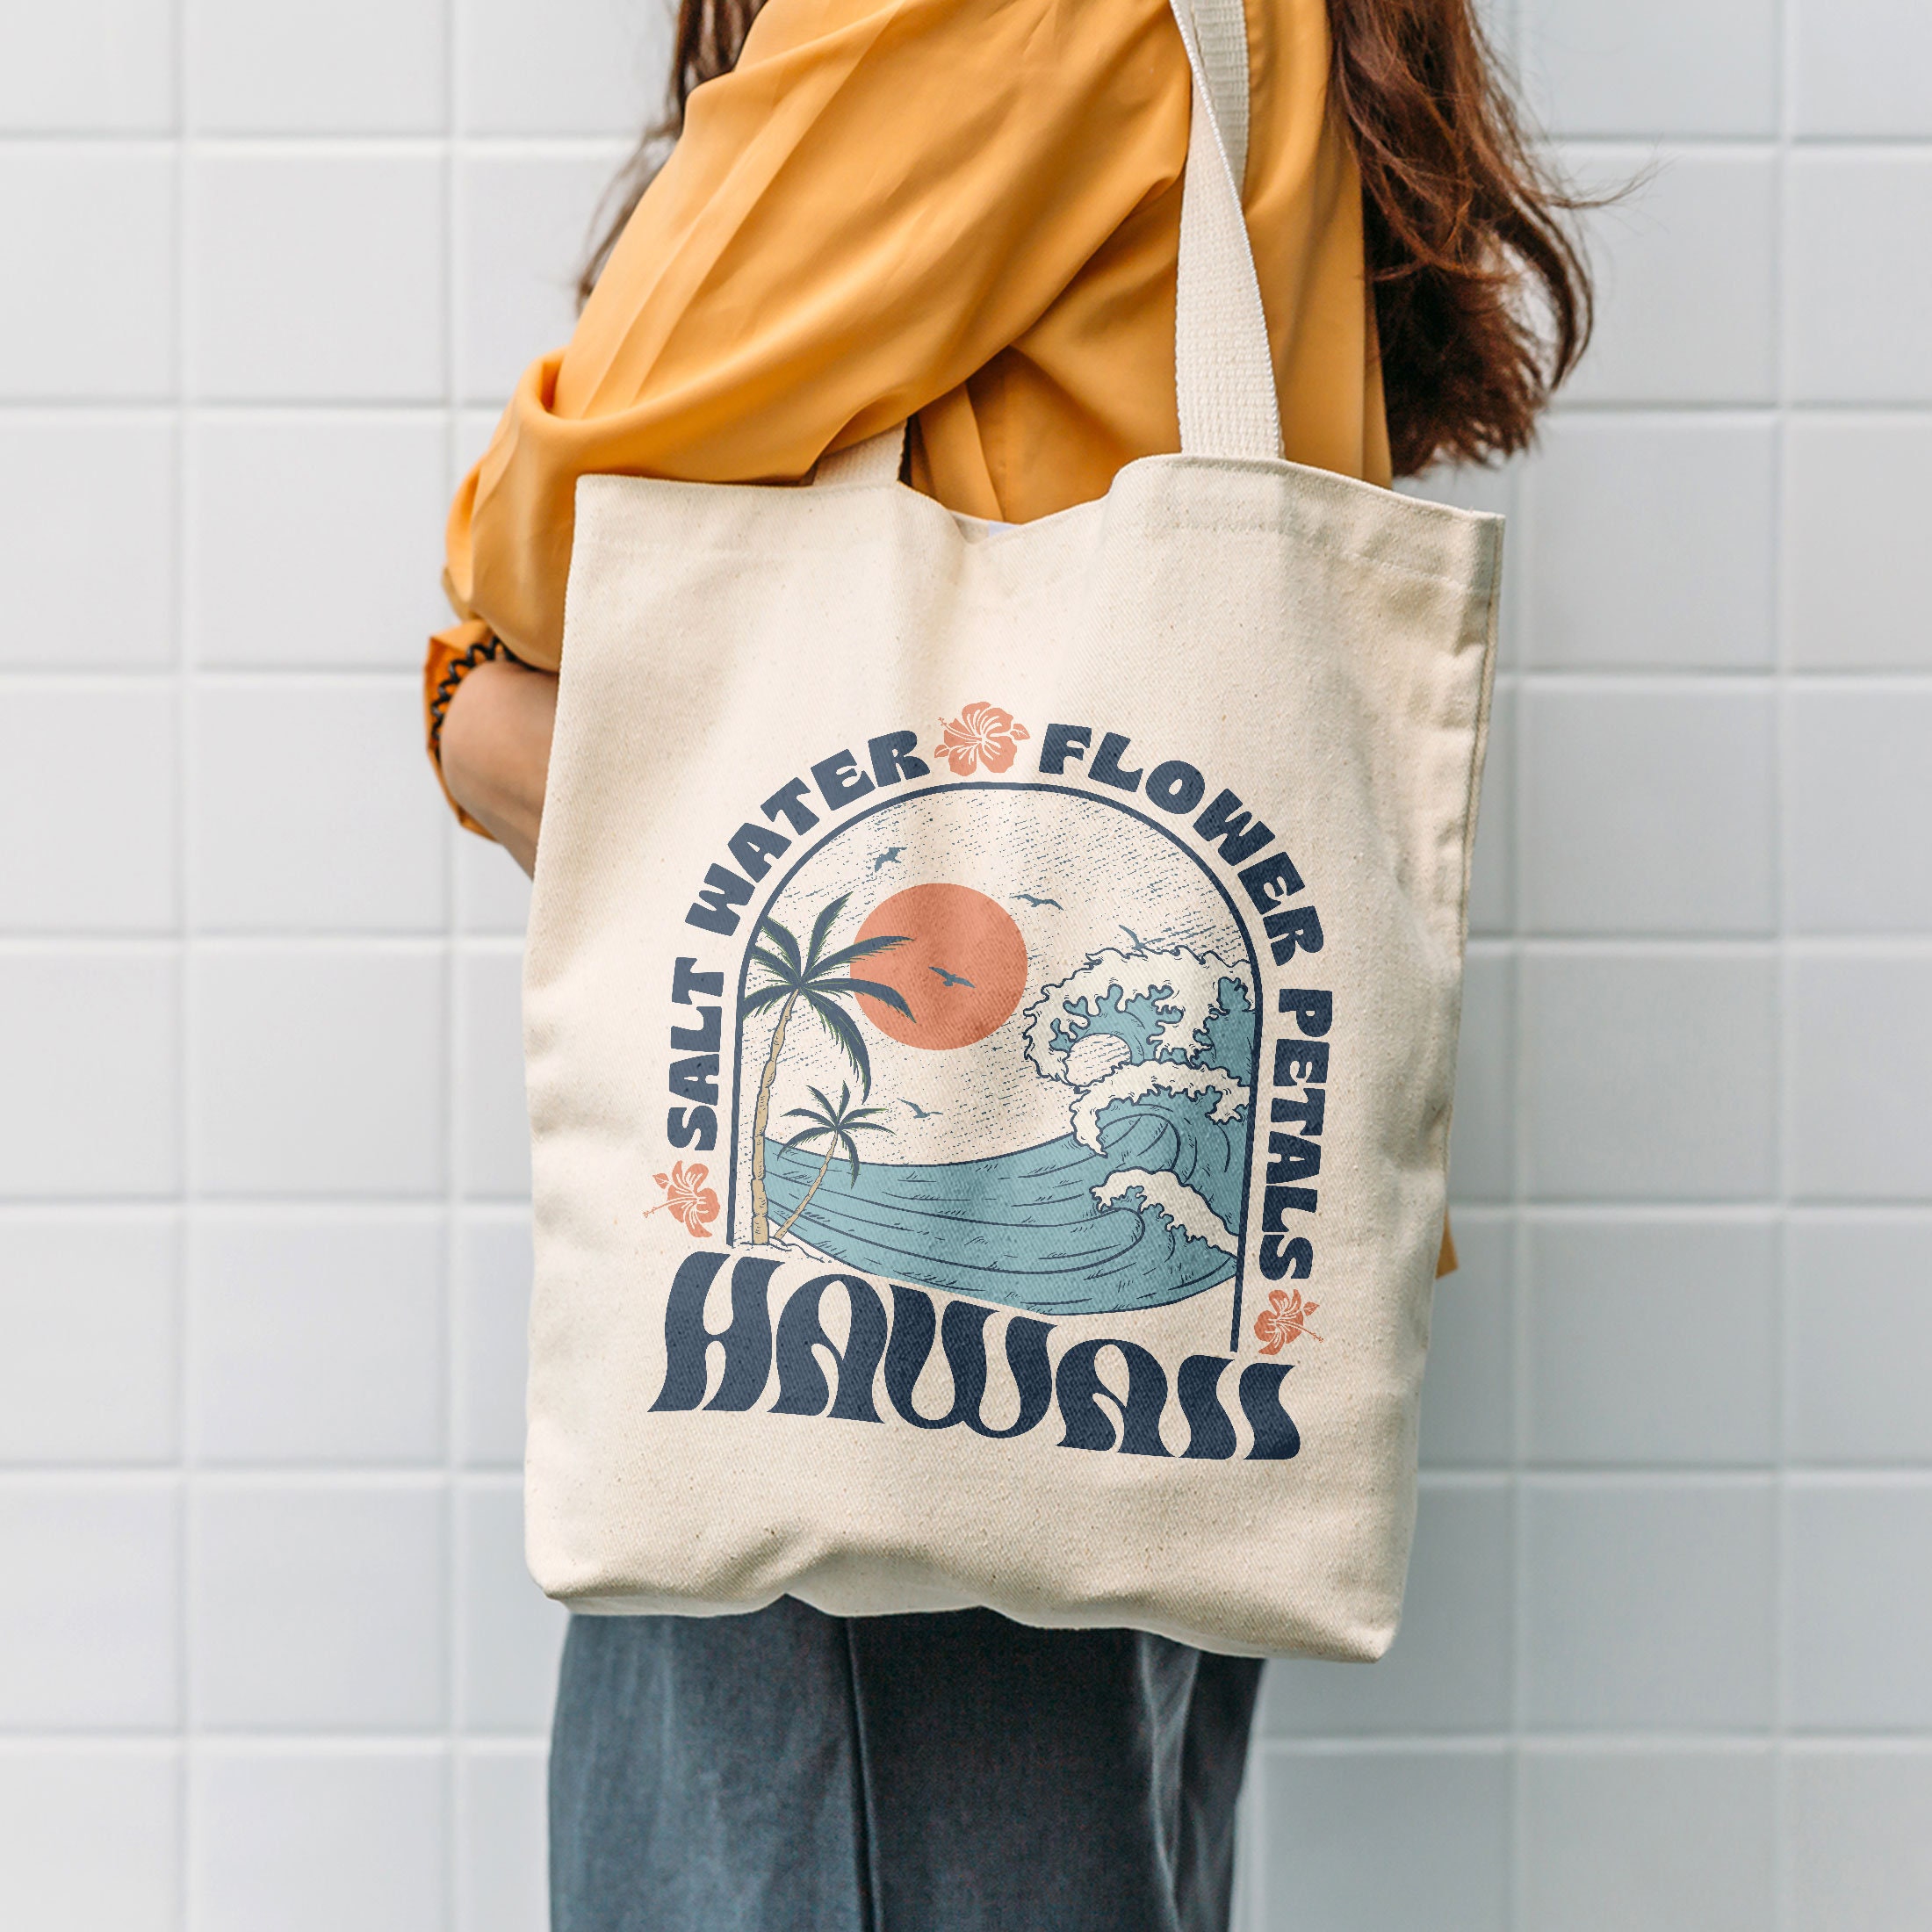 Say “Hello, Summer!” With These Cute Beach Bags